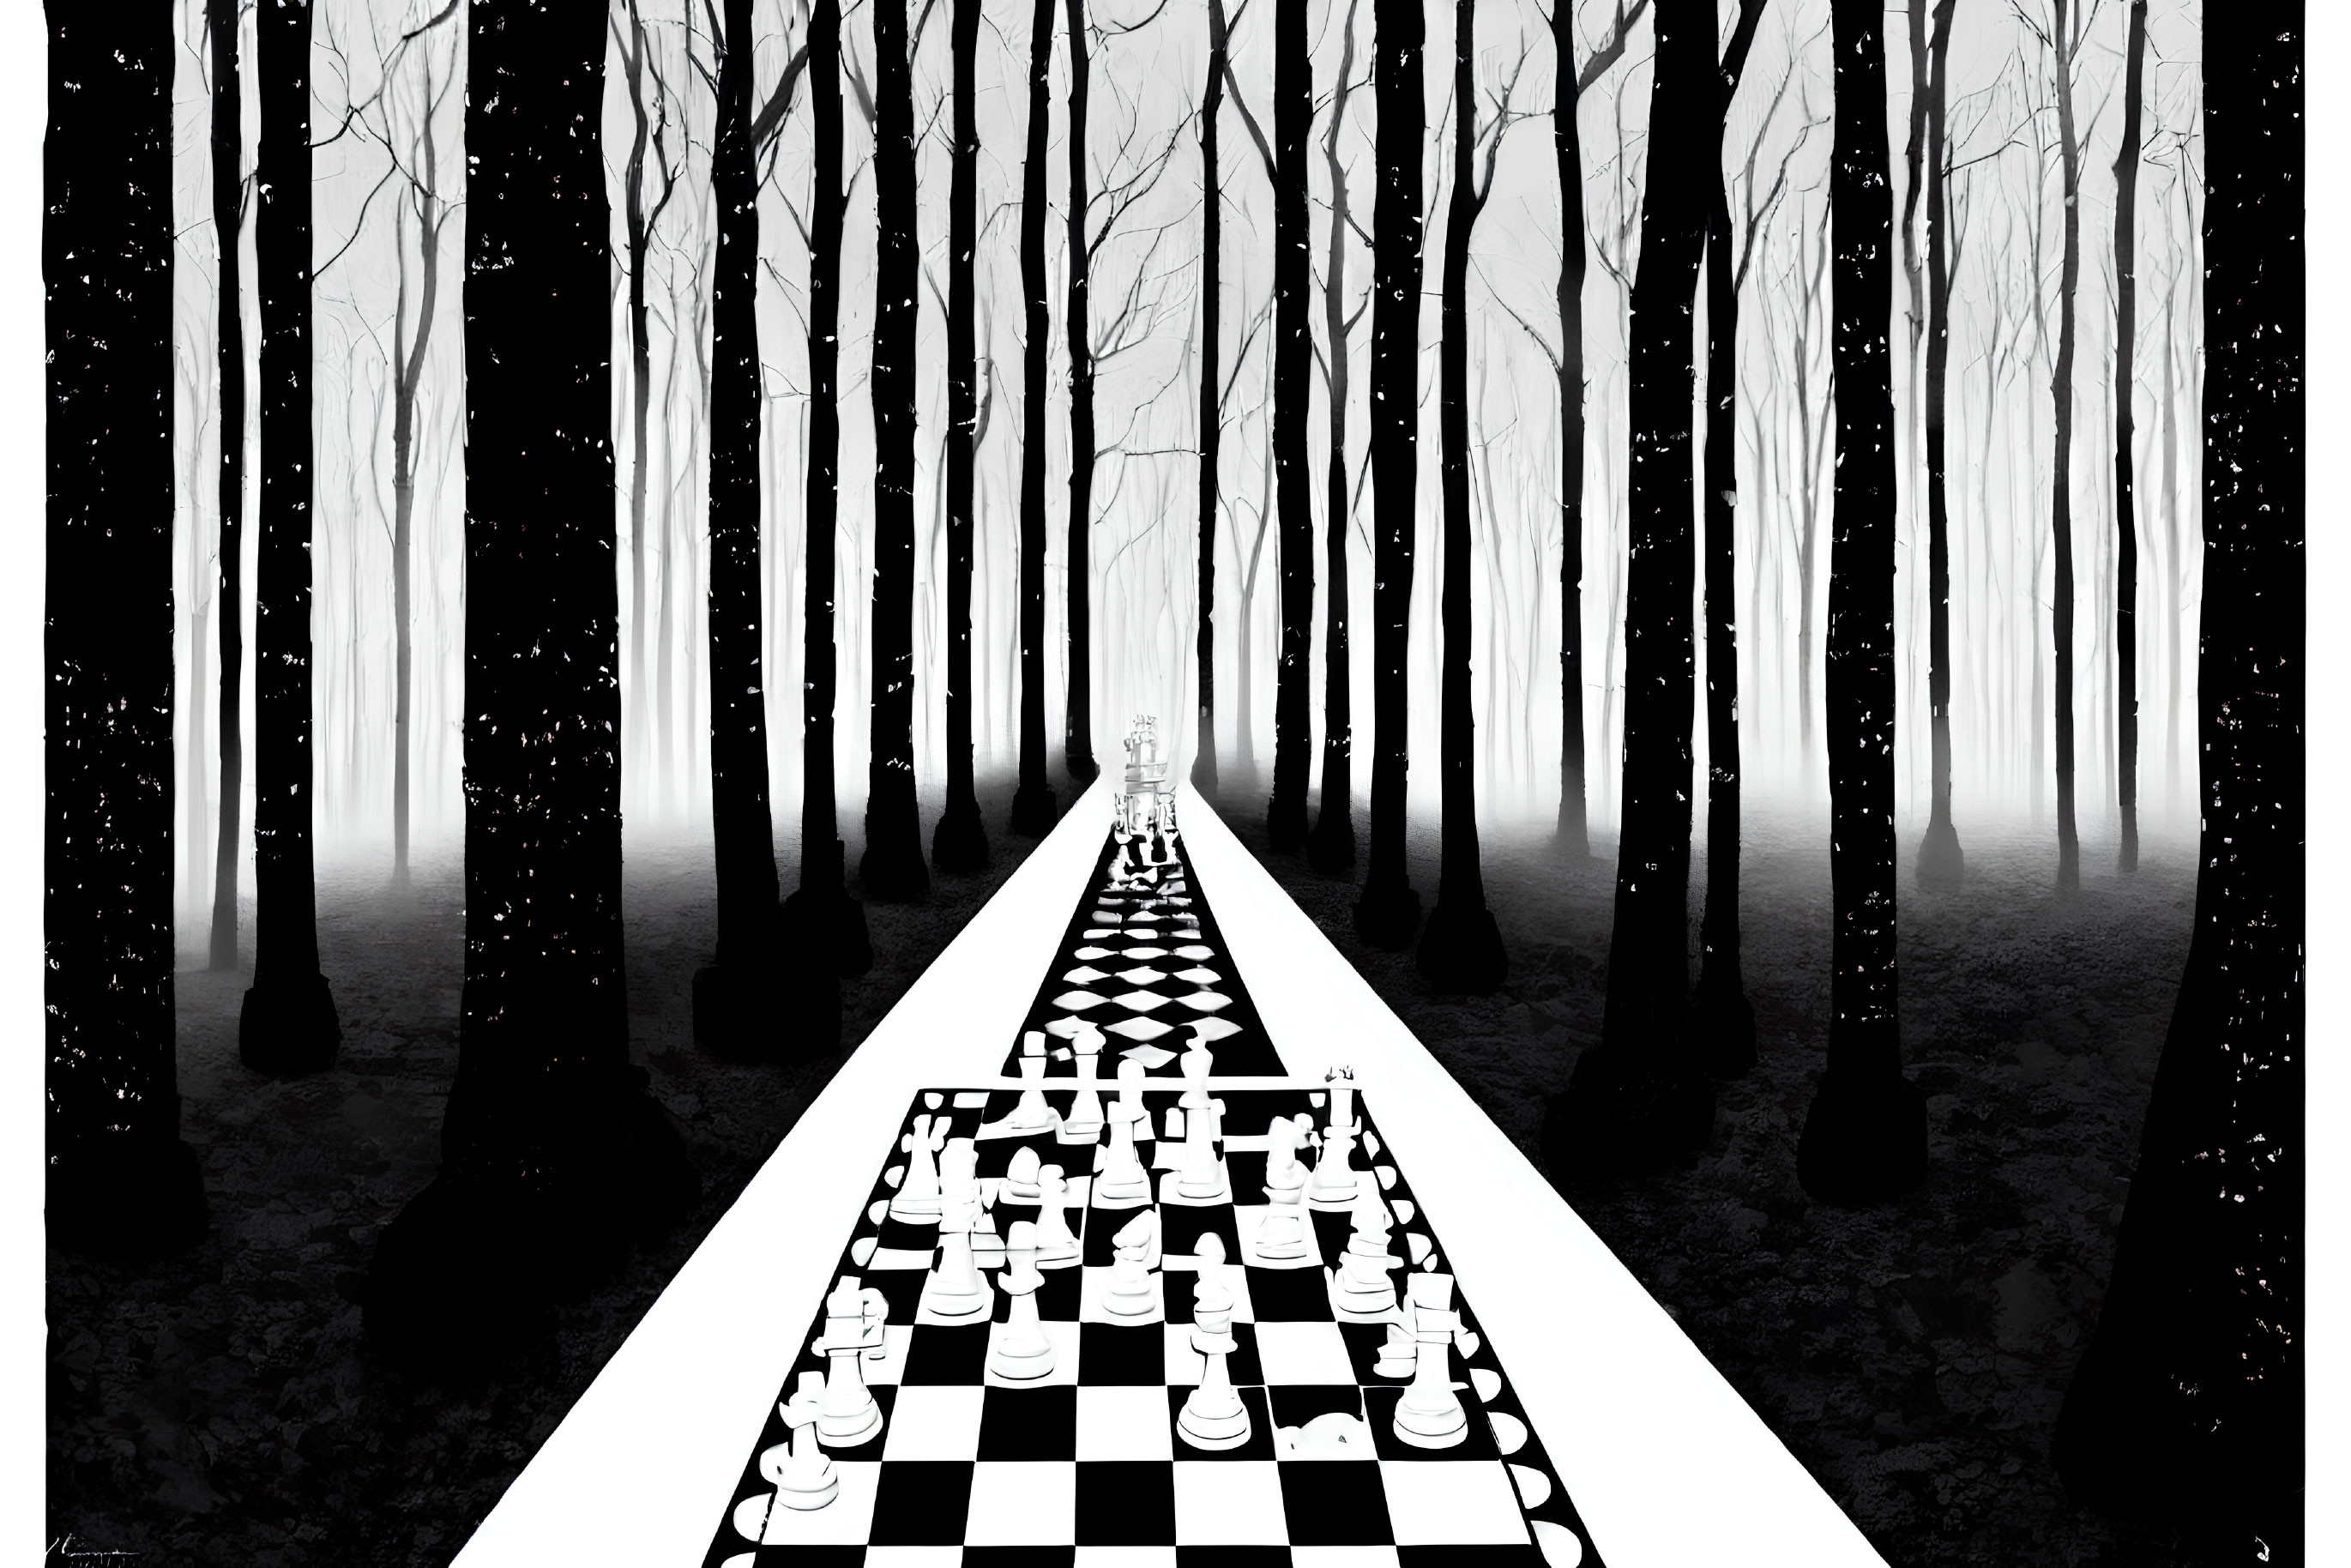 Monochrome chessboard path to misty forest with figure